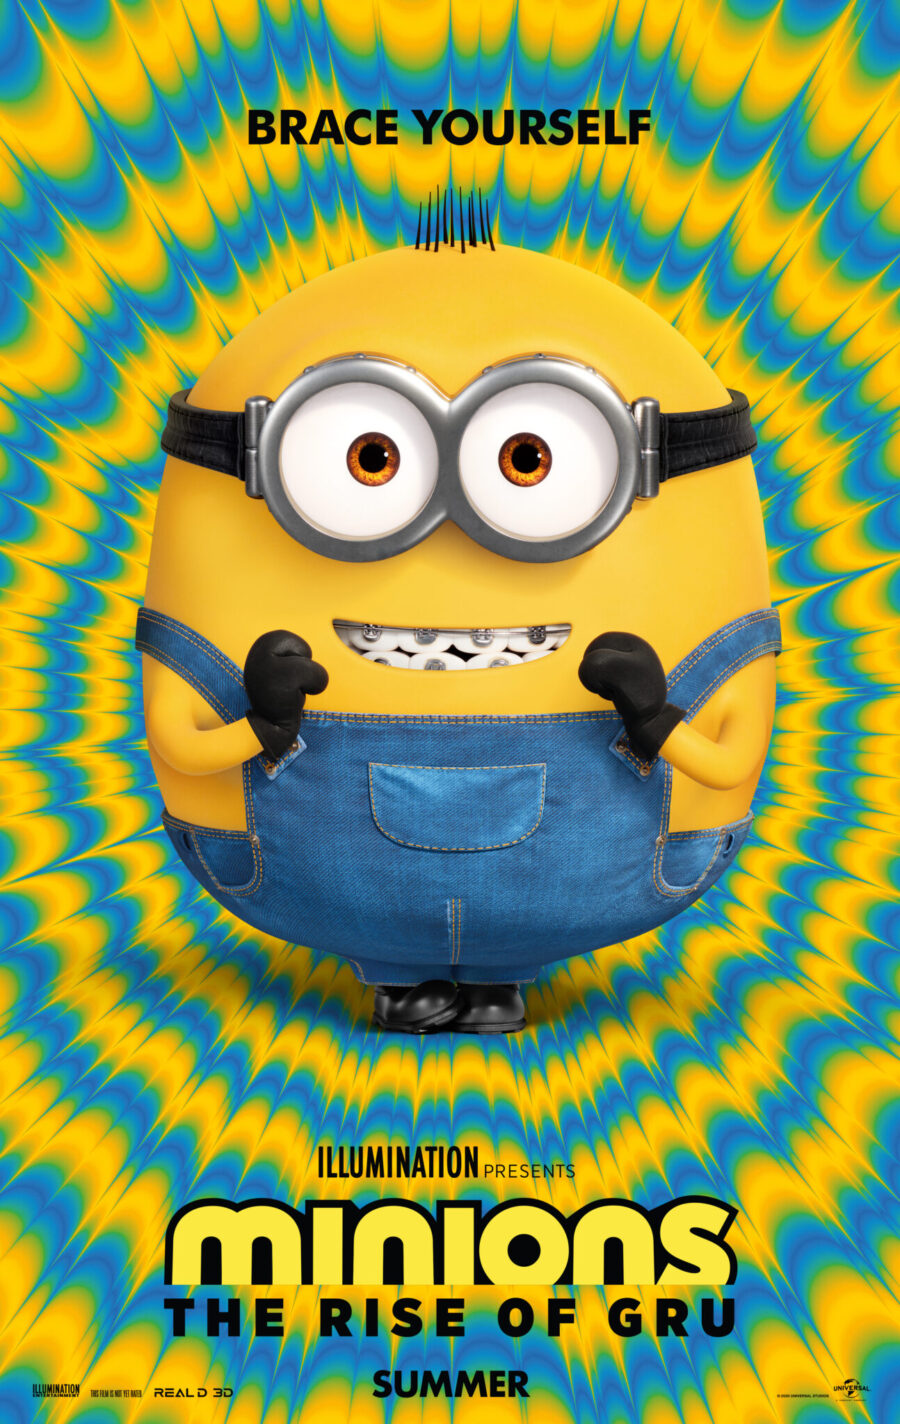 Minions: The Rise of Gru— coming to theaters in July! #Minions #TheRiseofGru